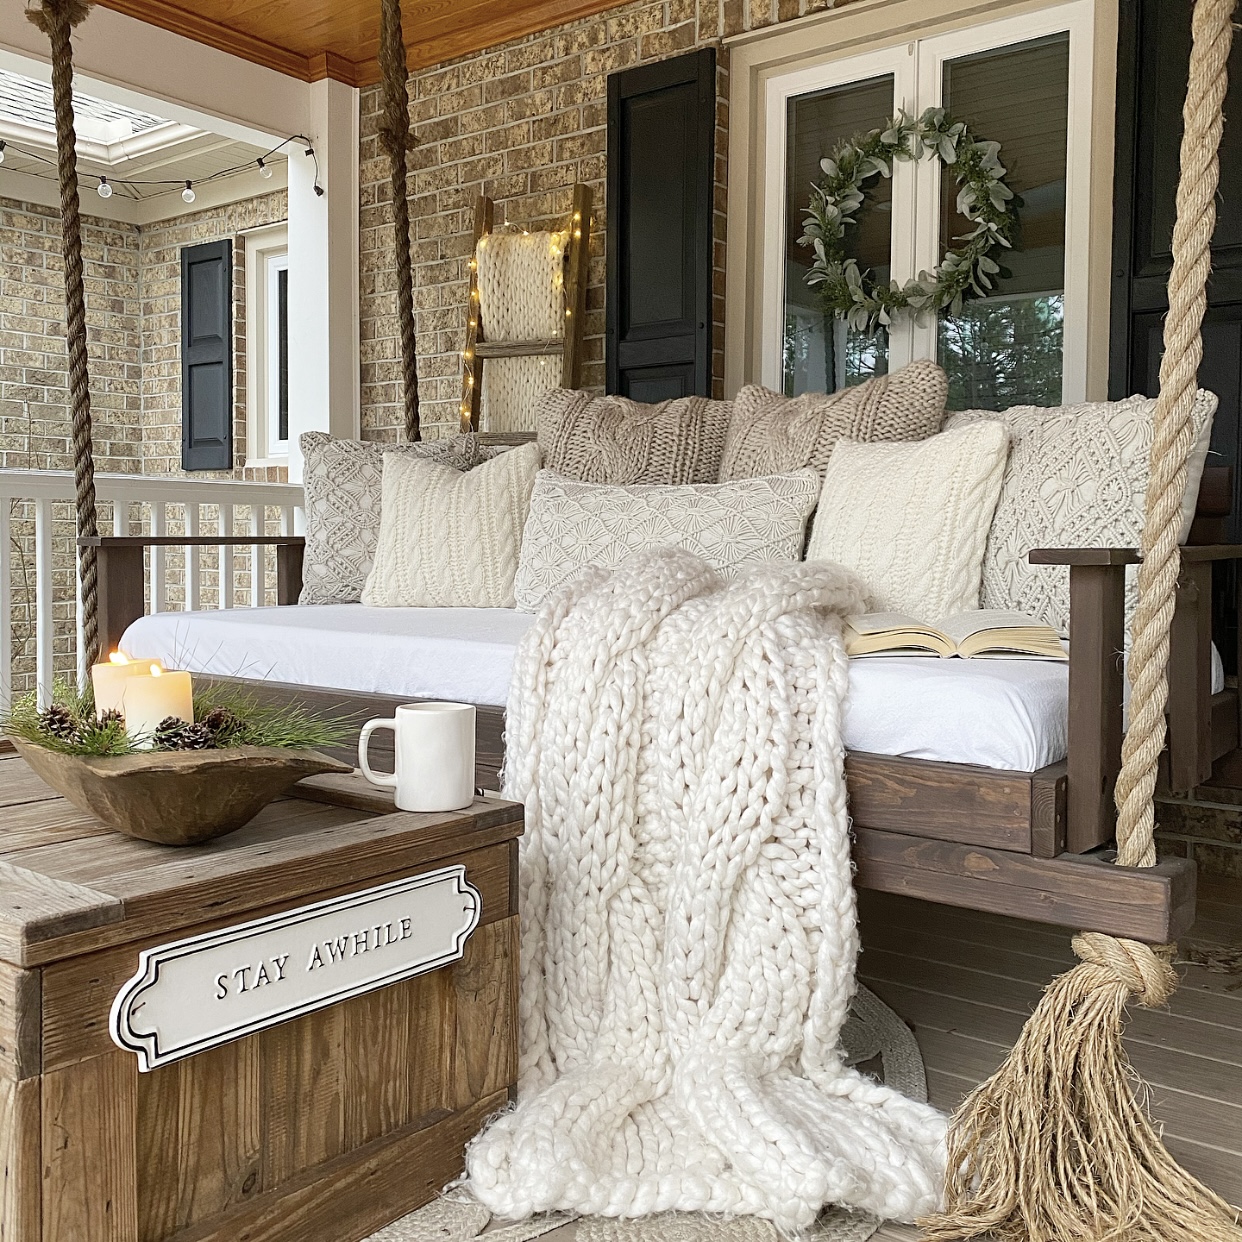 Wood front porch swing with cozy knit pillows and a blanket on it. 